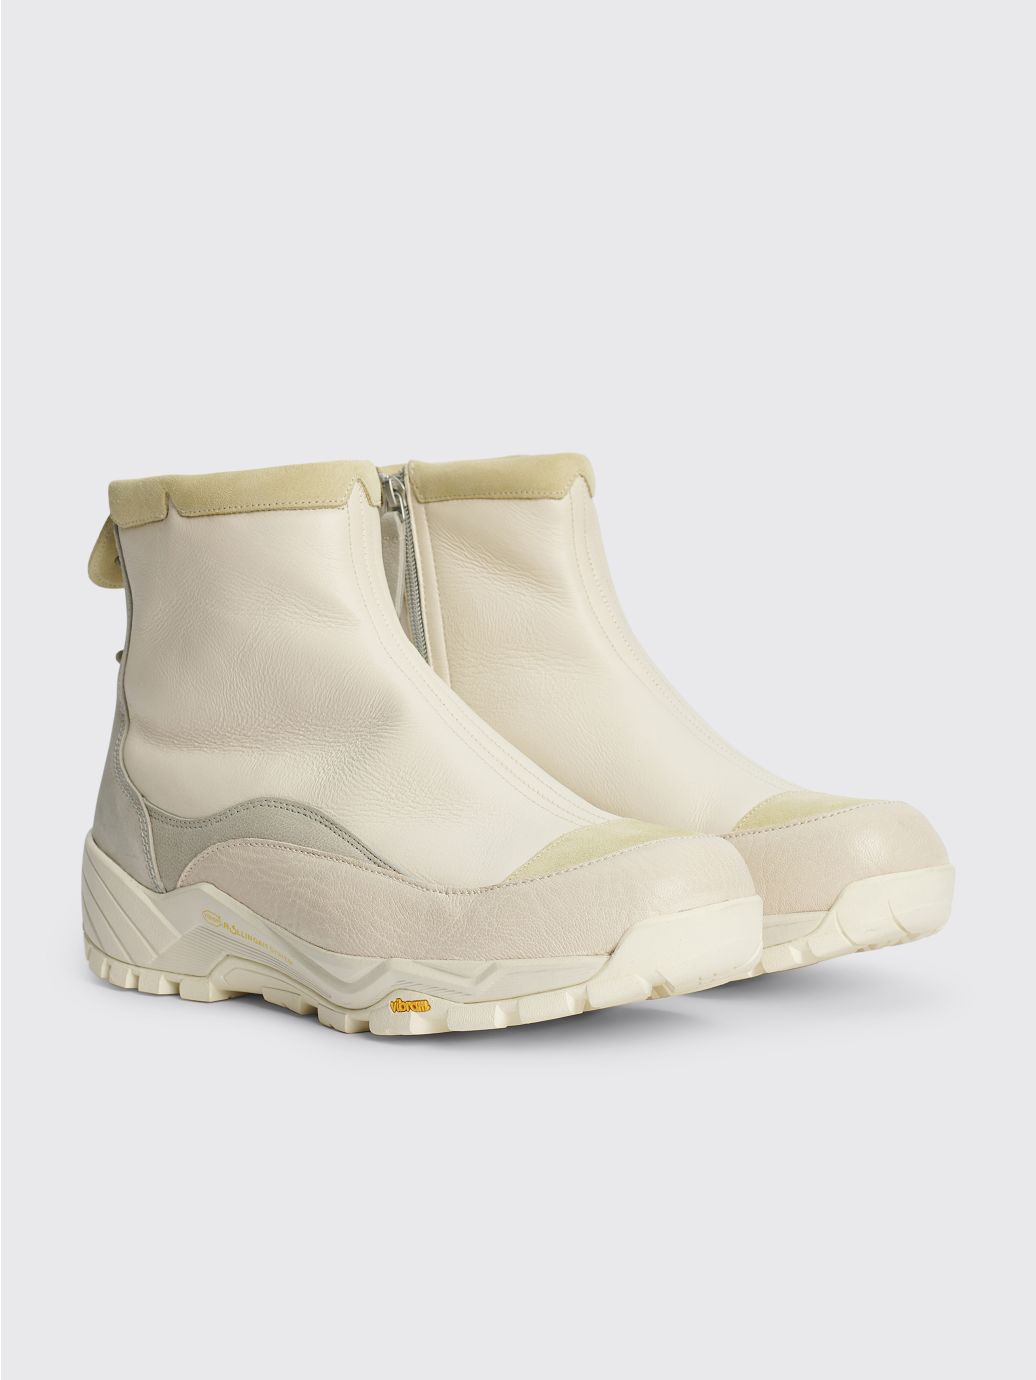 tres-bien.com | Our Legacy Yeti Boots White Shearling